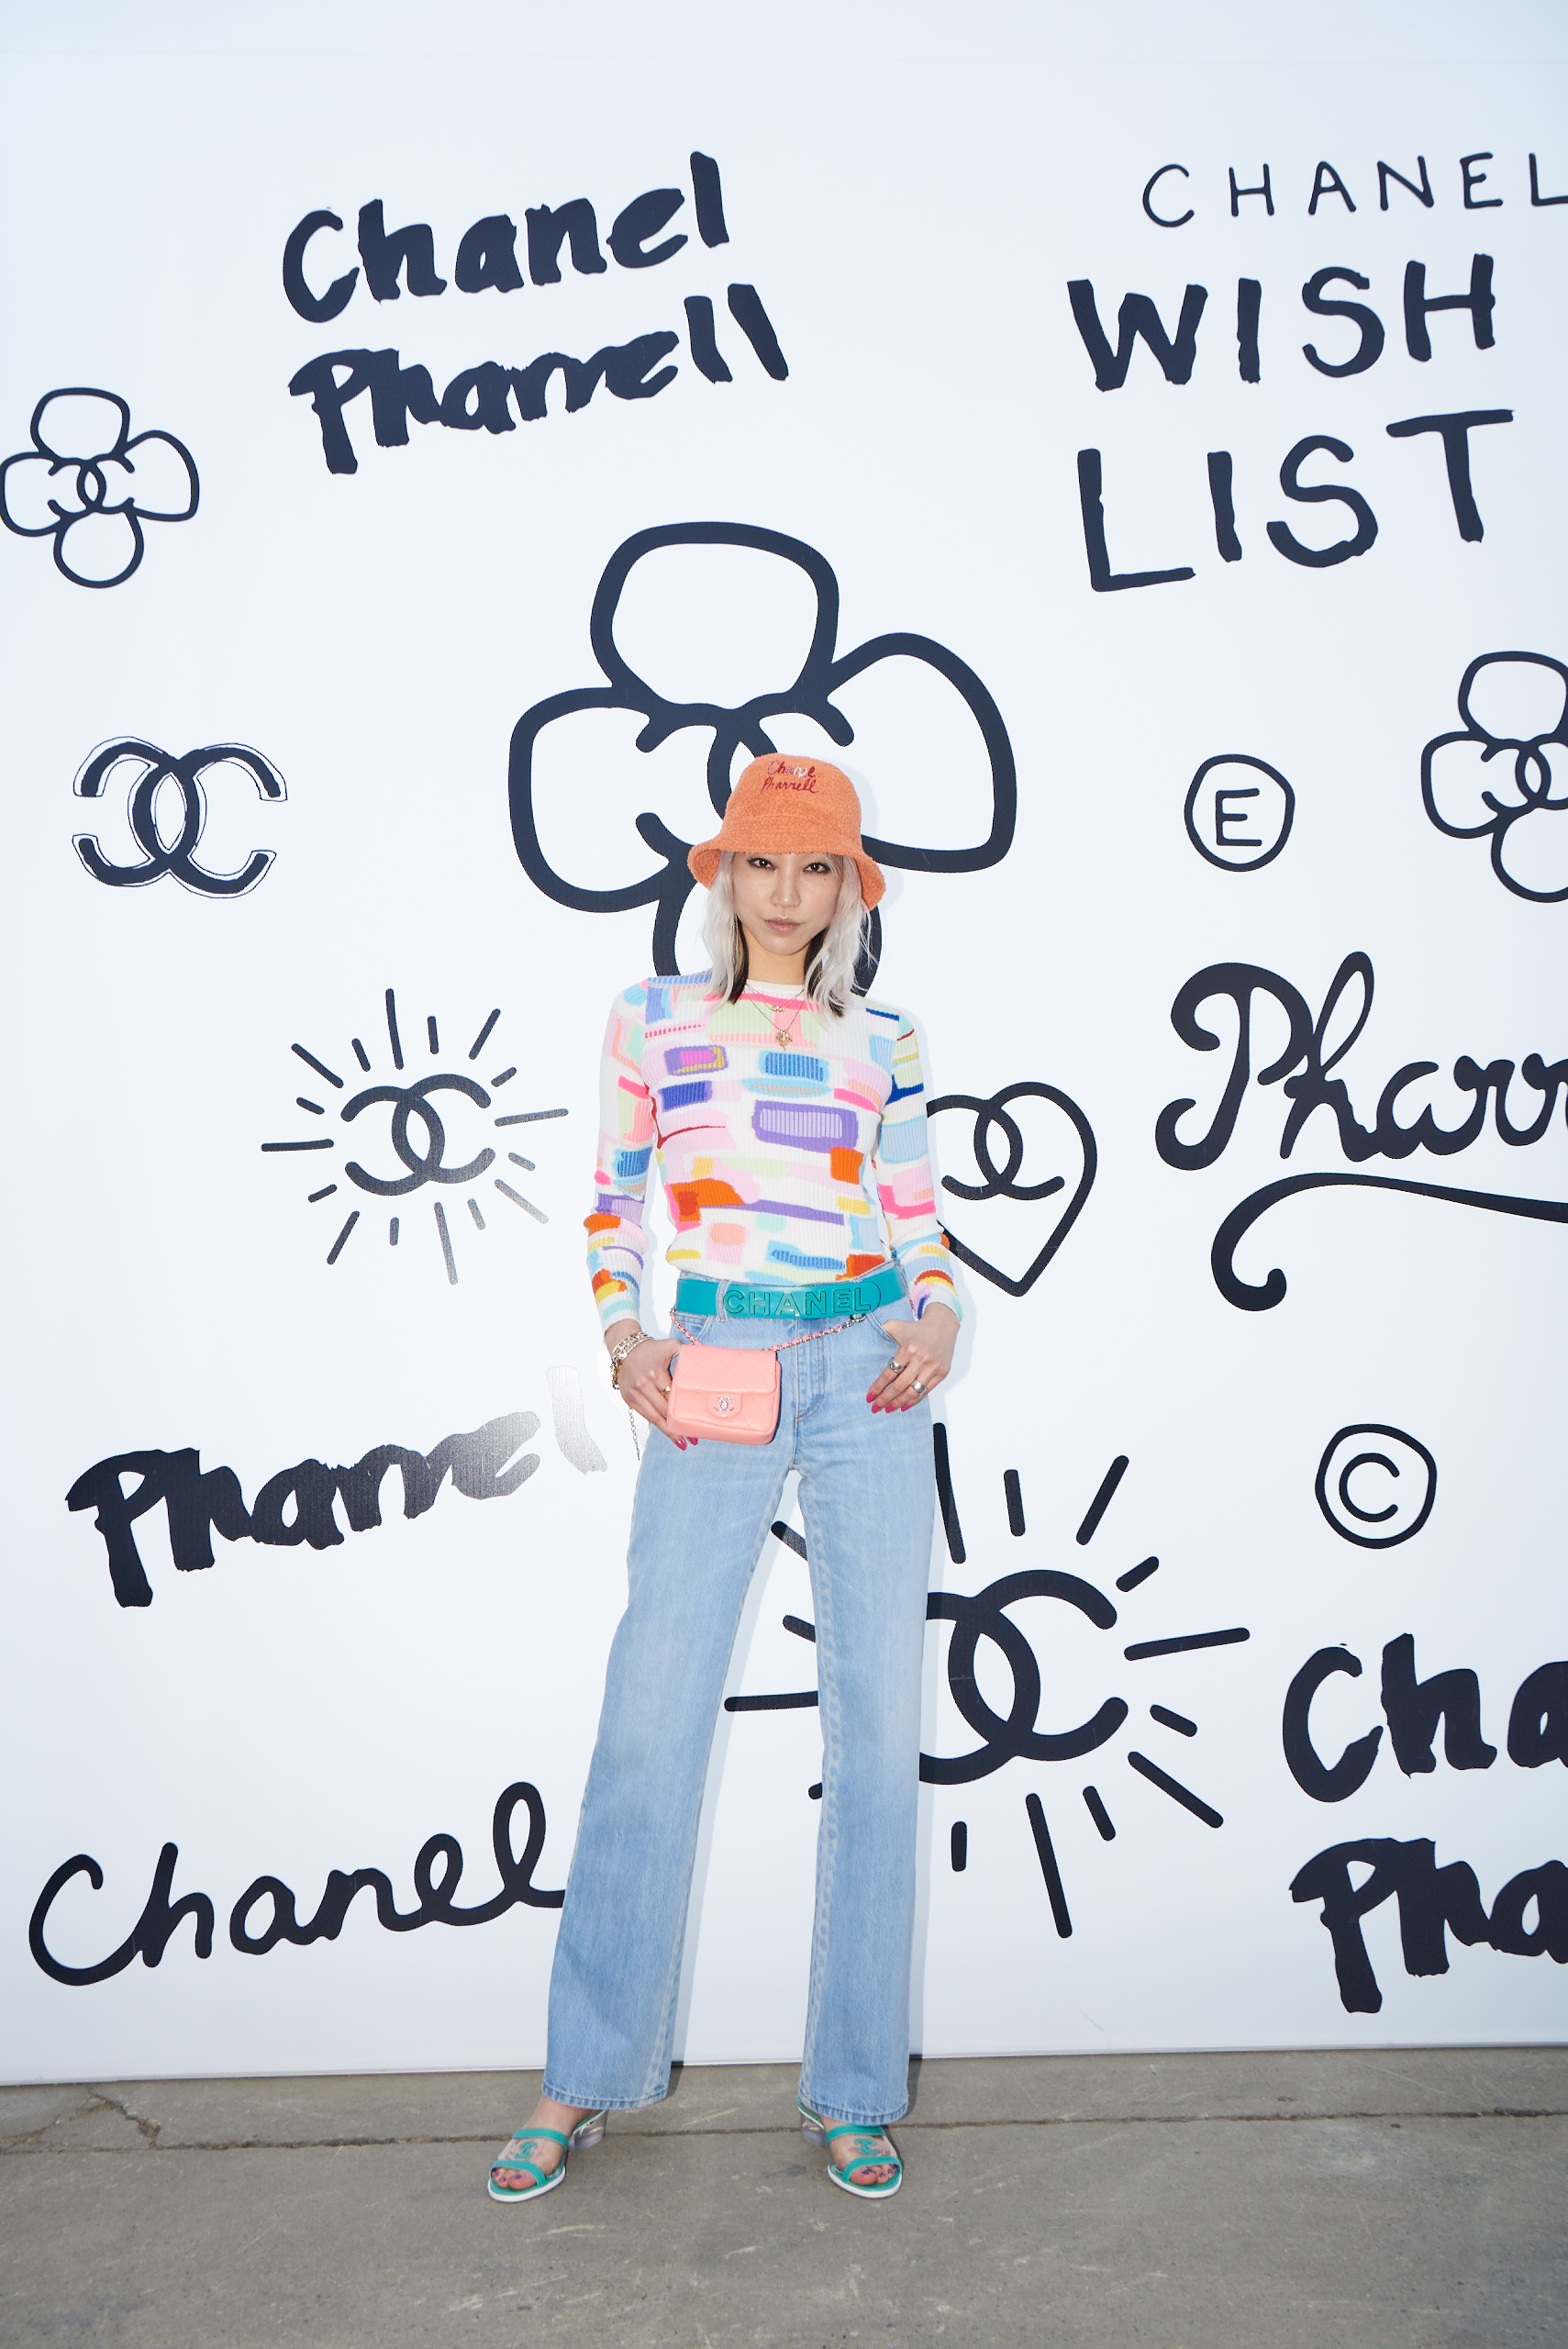 Pharrell Williams Launches Collection at Seoul Chanel Store